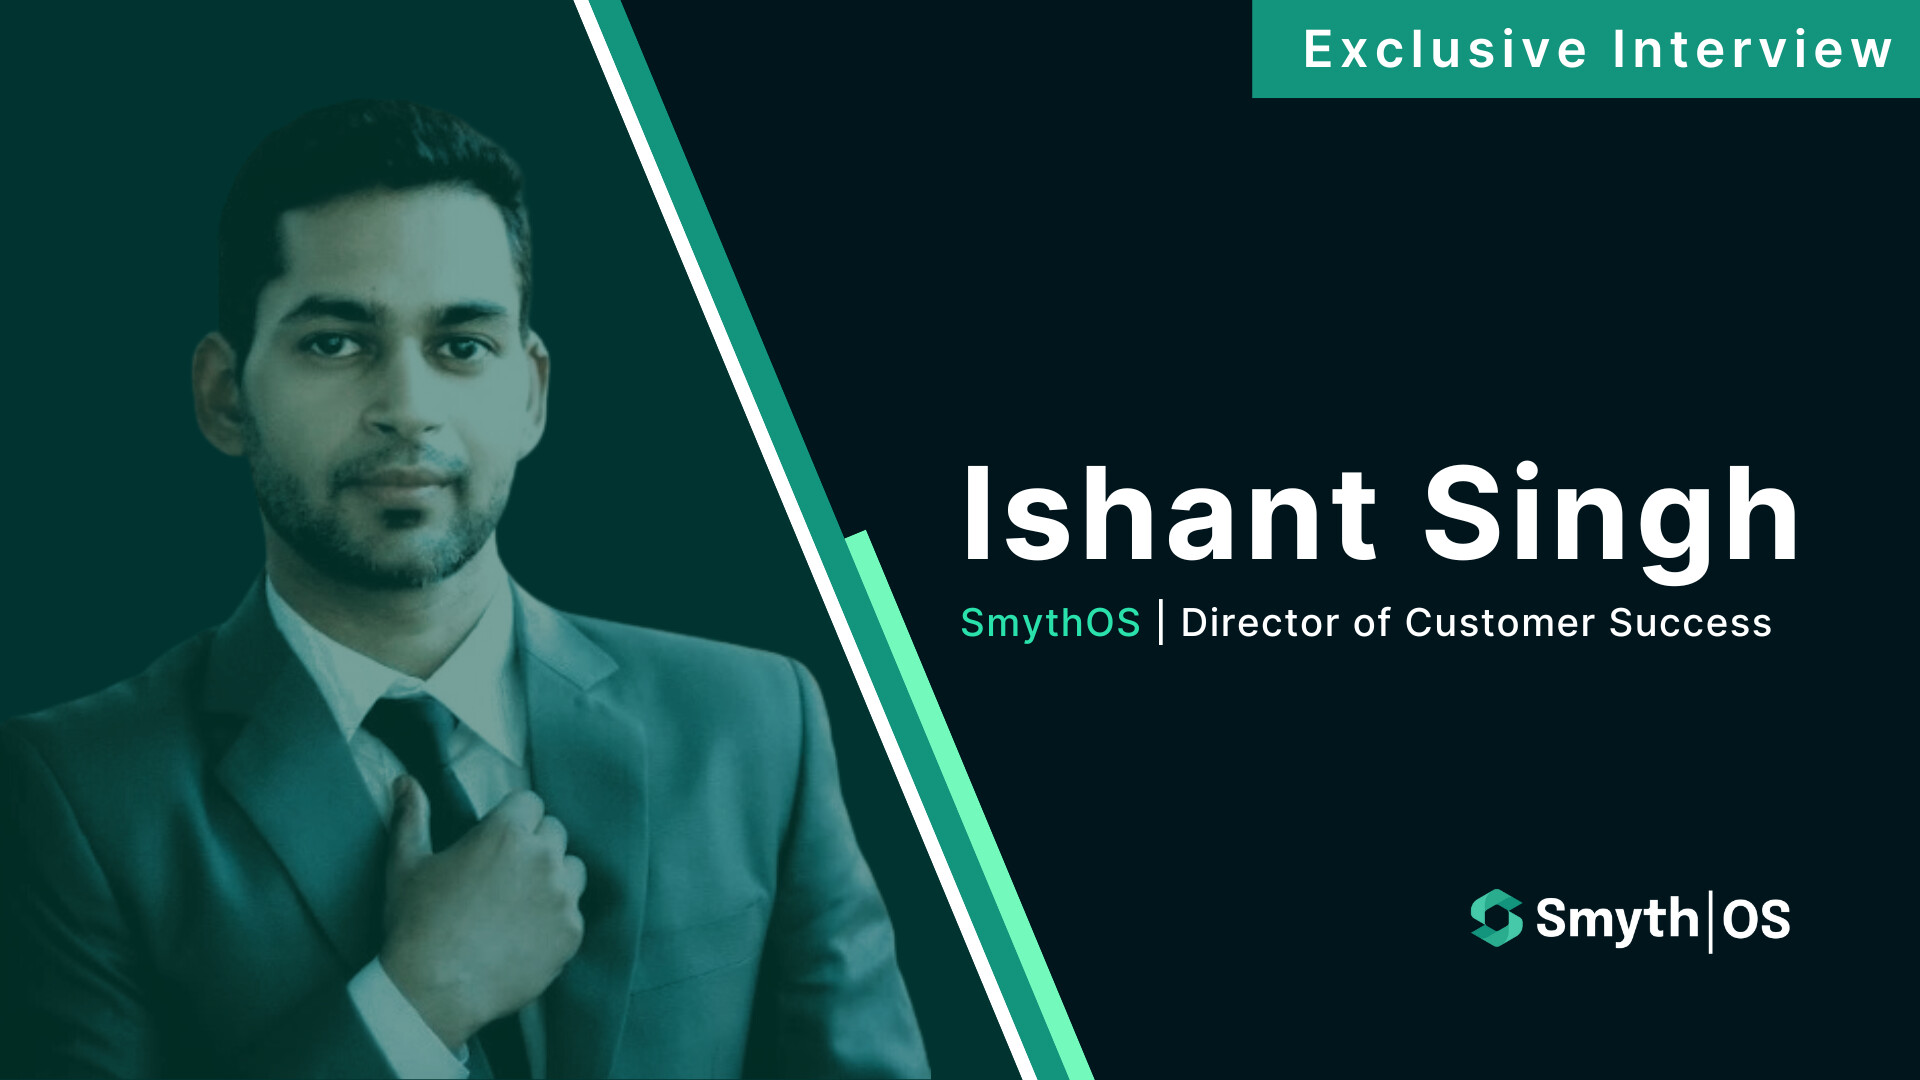 Exclusive interview with SmythOS's new Director of Customer Success, Ishant Singh